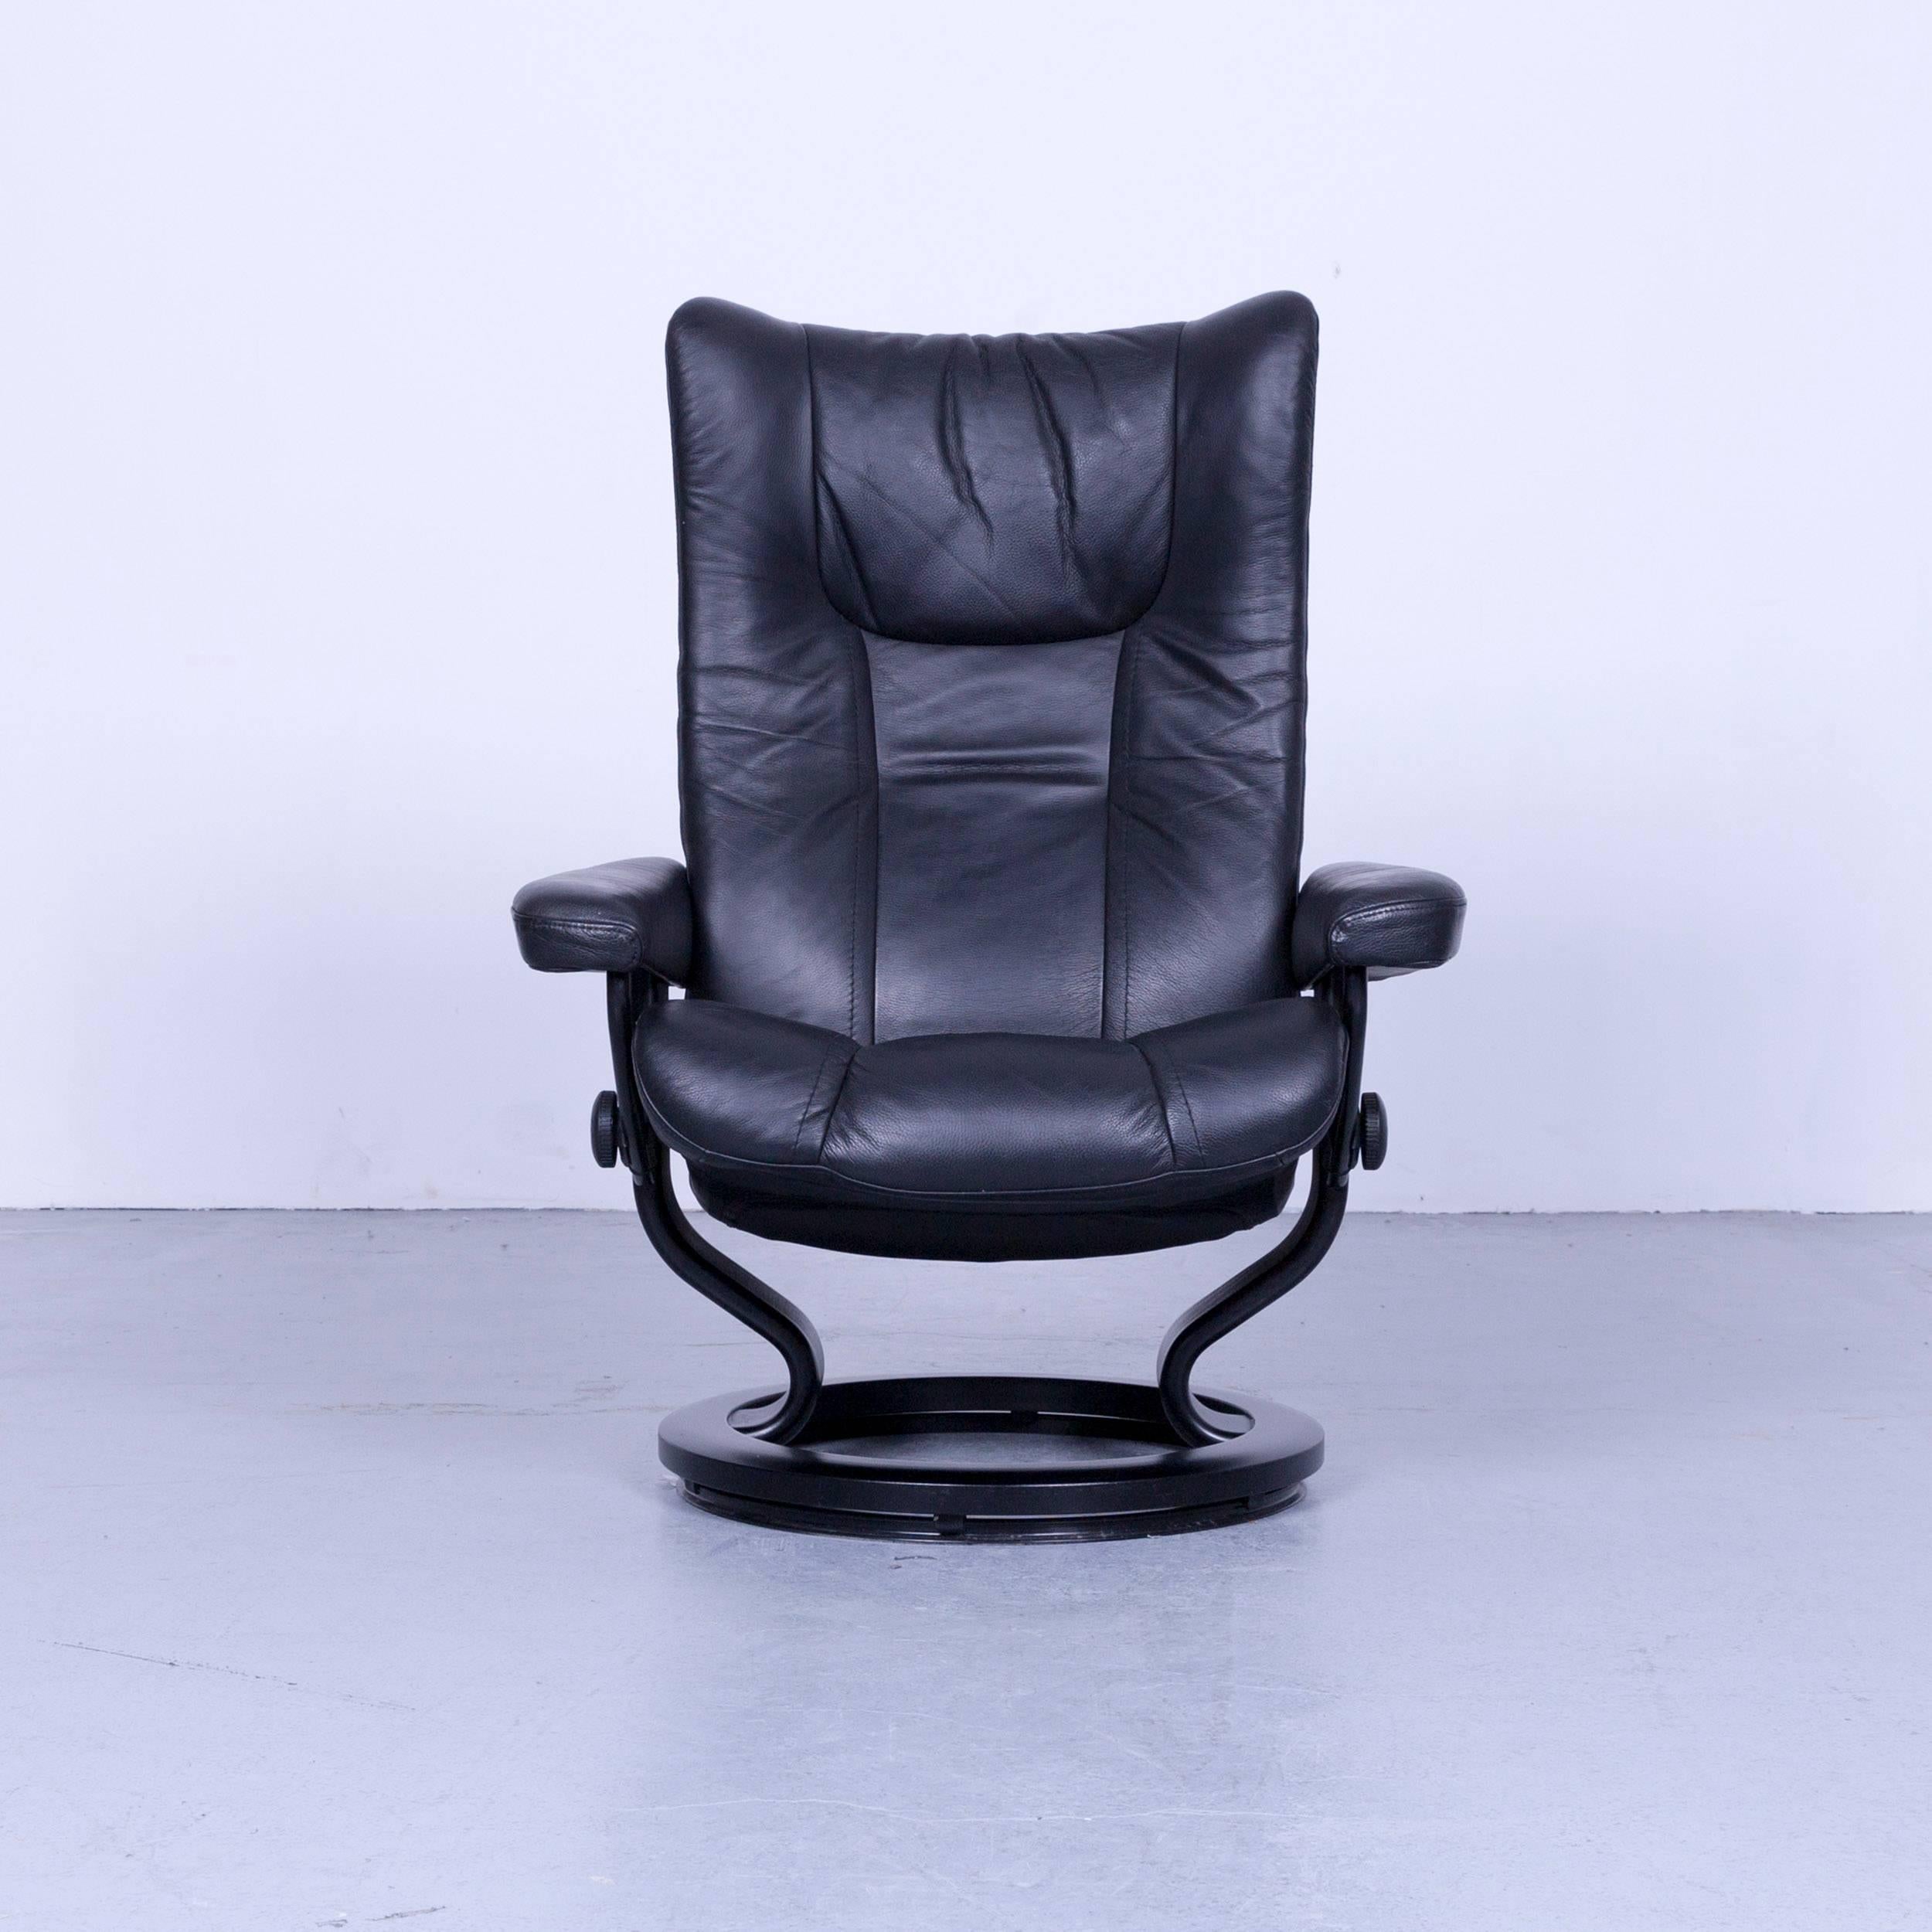 Ekornes Stressless wing armchair black leather modern recliner chair designer, with convenient functions, made for pure comfort and flexibility.